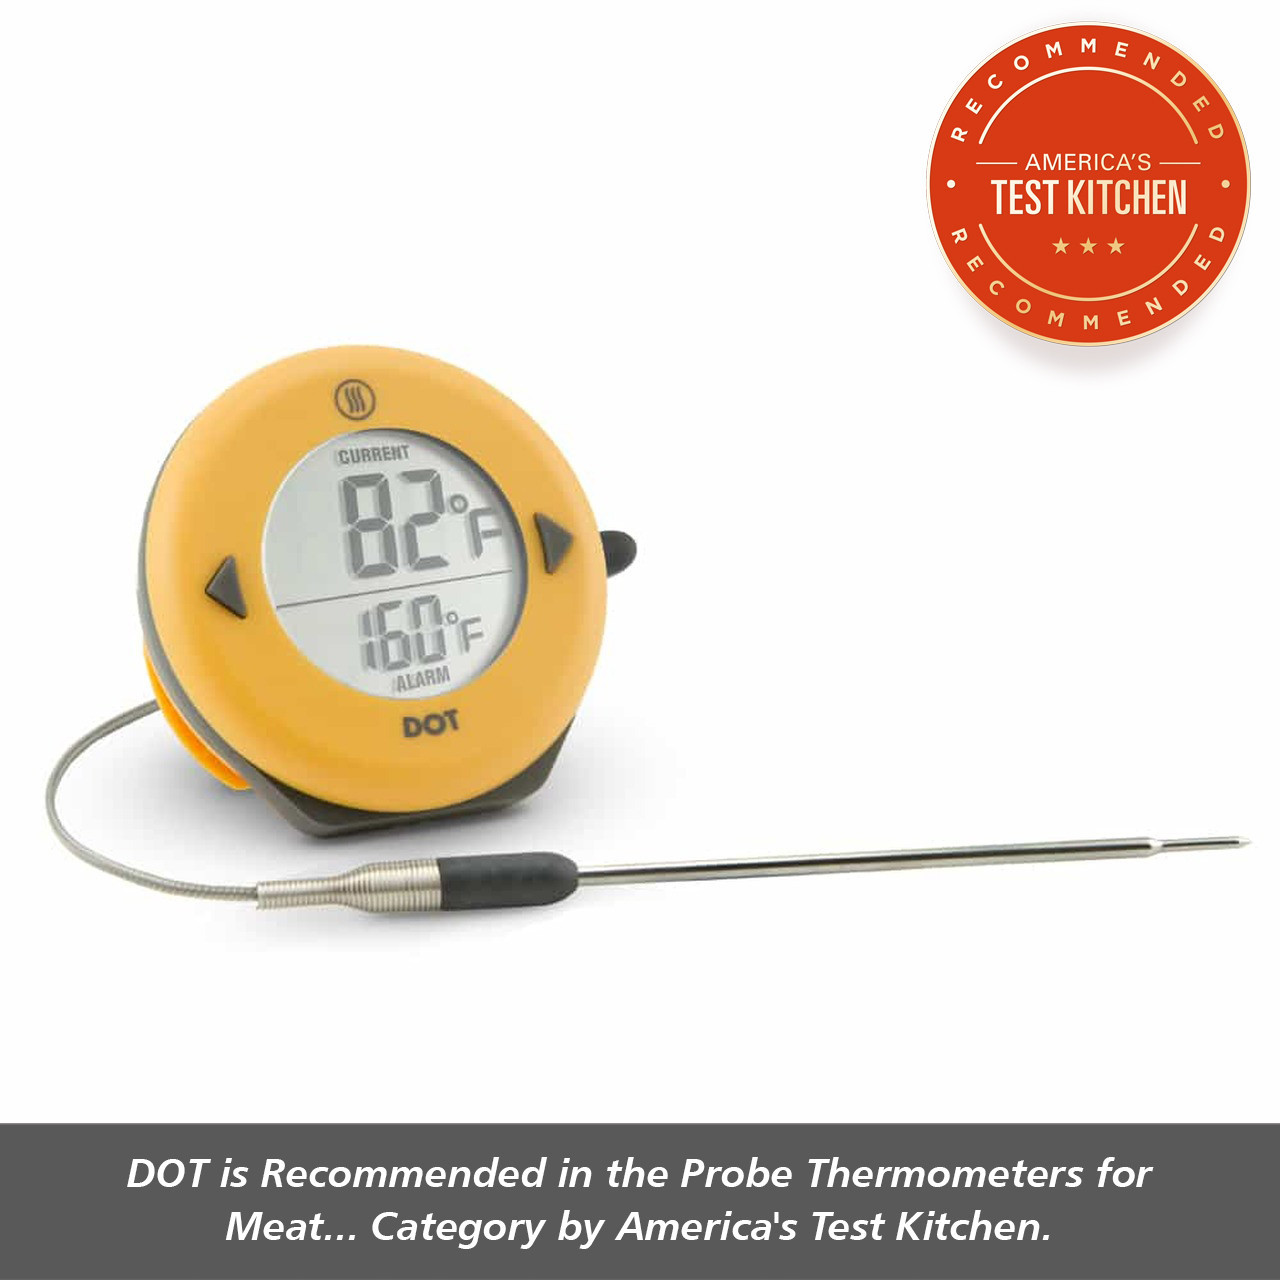 ThermoWorks Dot Oven Alarm Thermometer Red